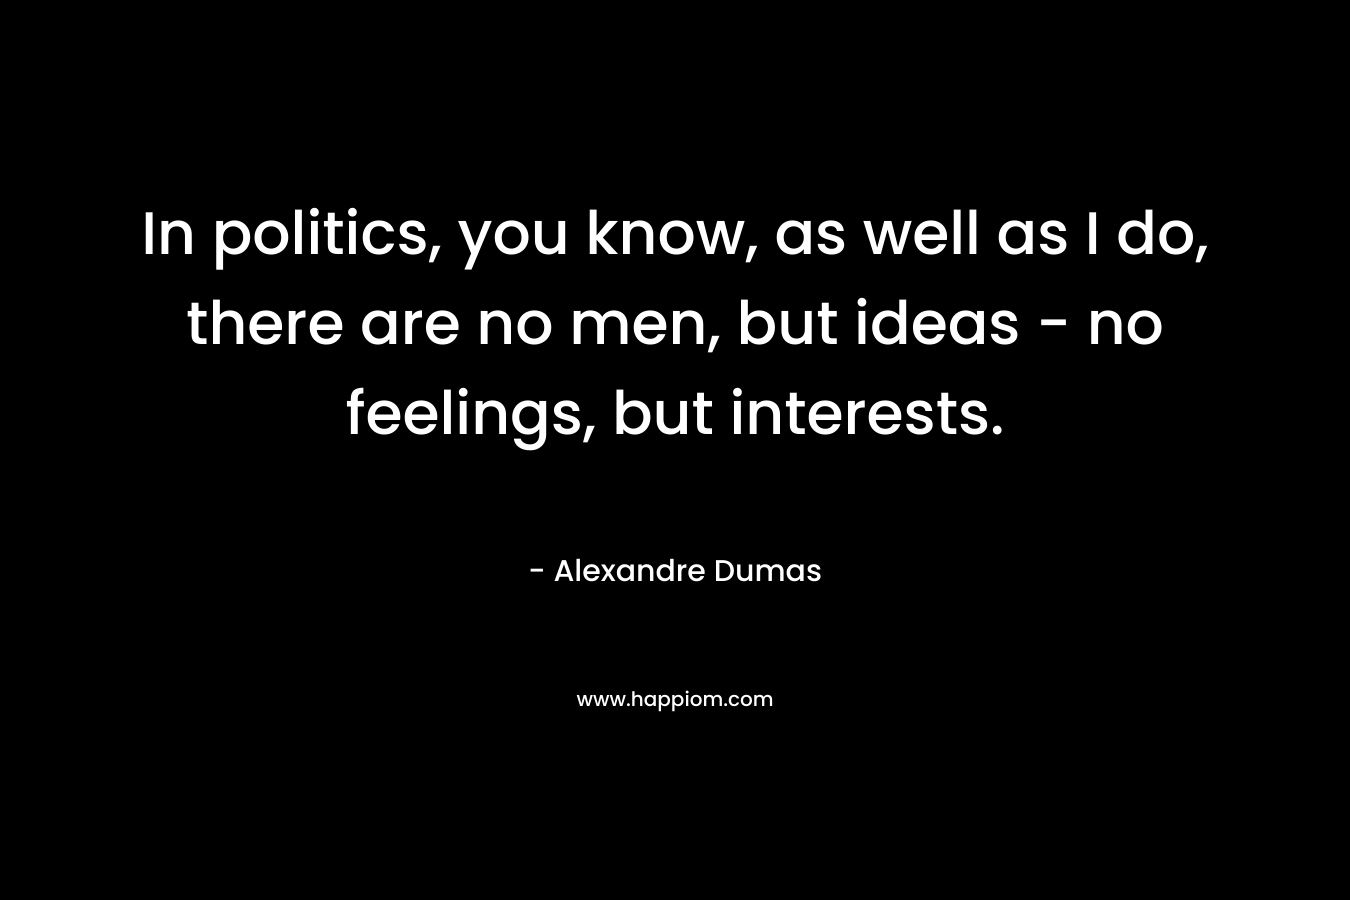 In politics, you know, as well as I do, there are no men, but ideas - no feelings, but interests.